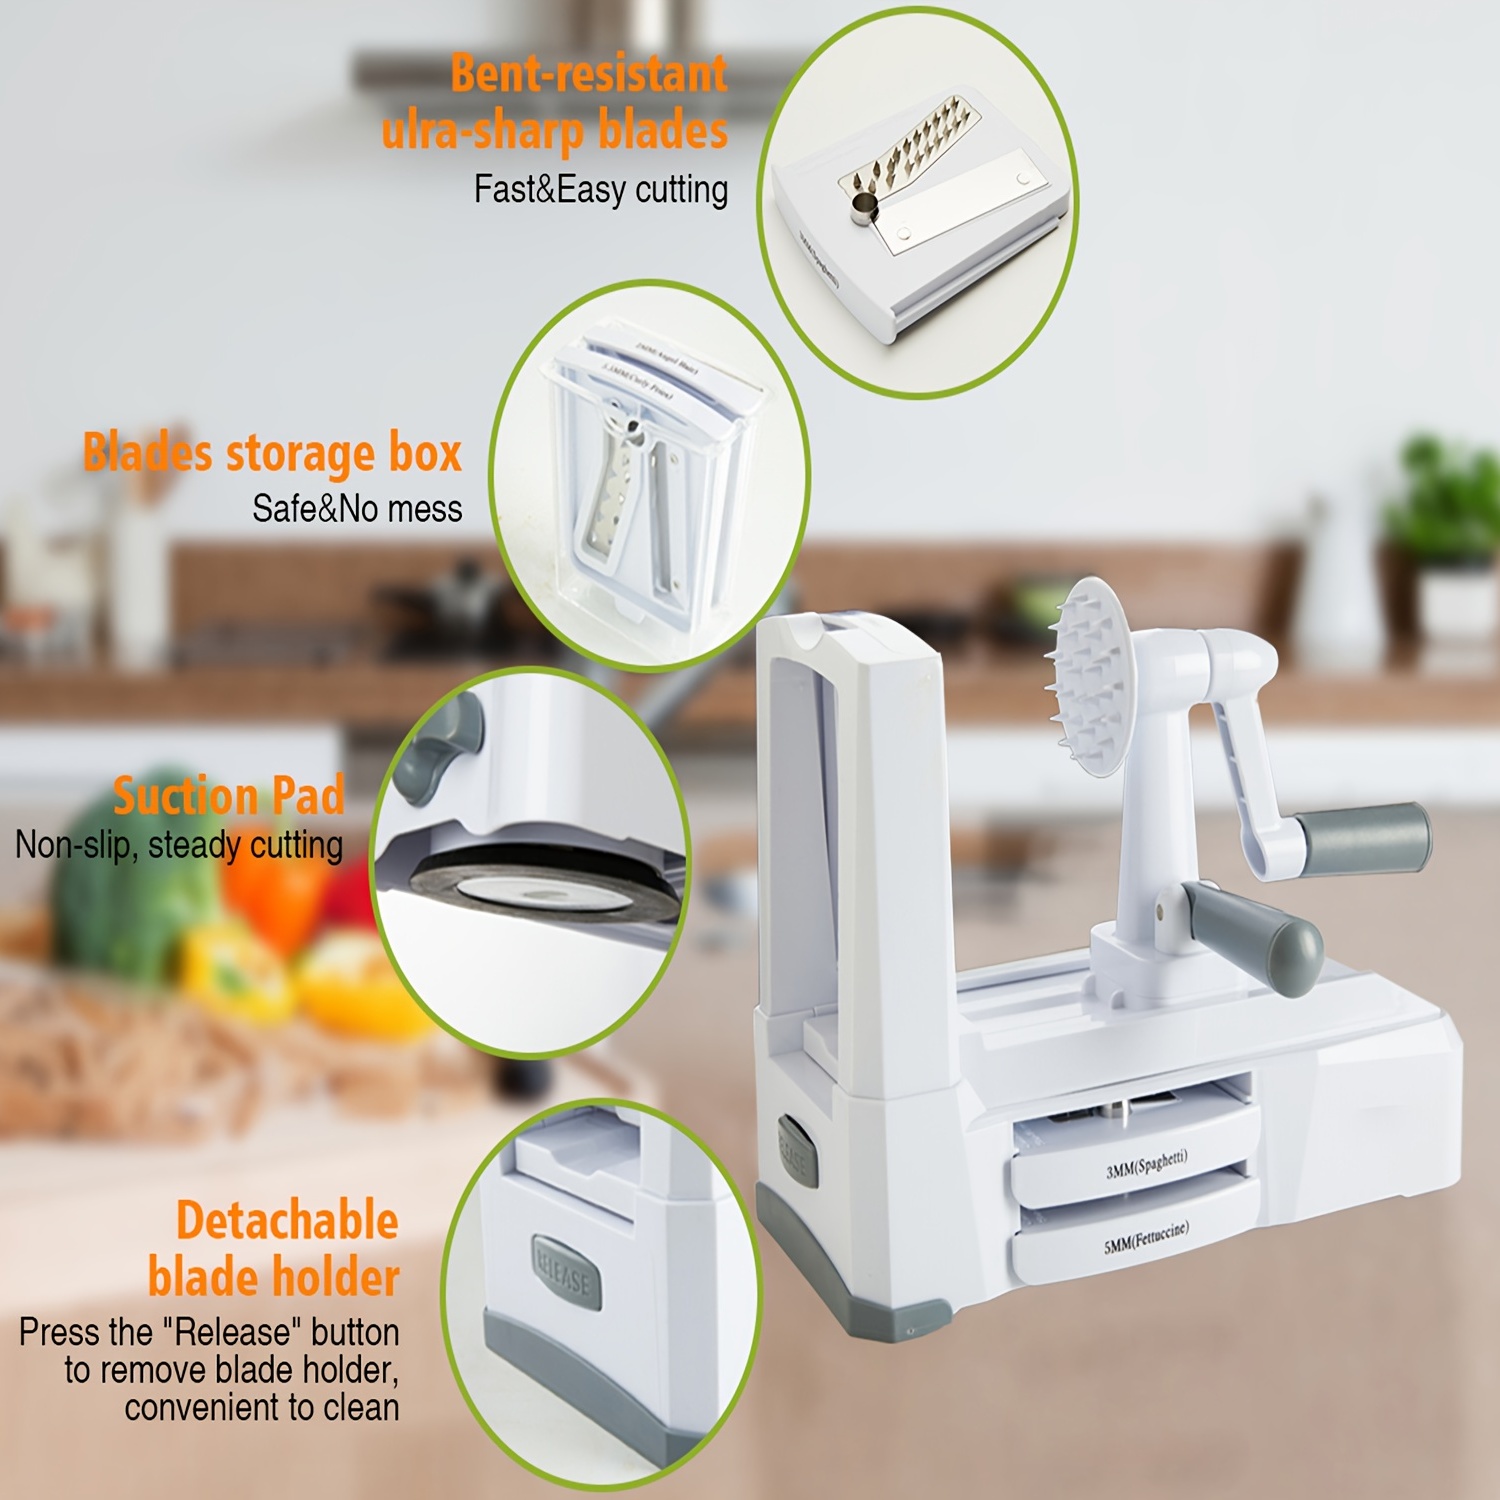  Electric Spiralizer with 3 Blades - Fast, Easy Spiral